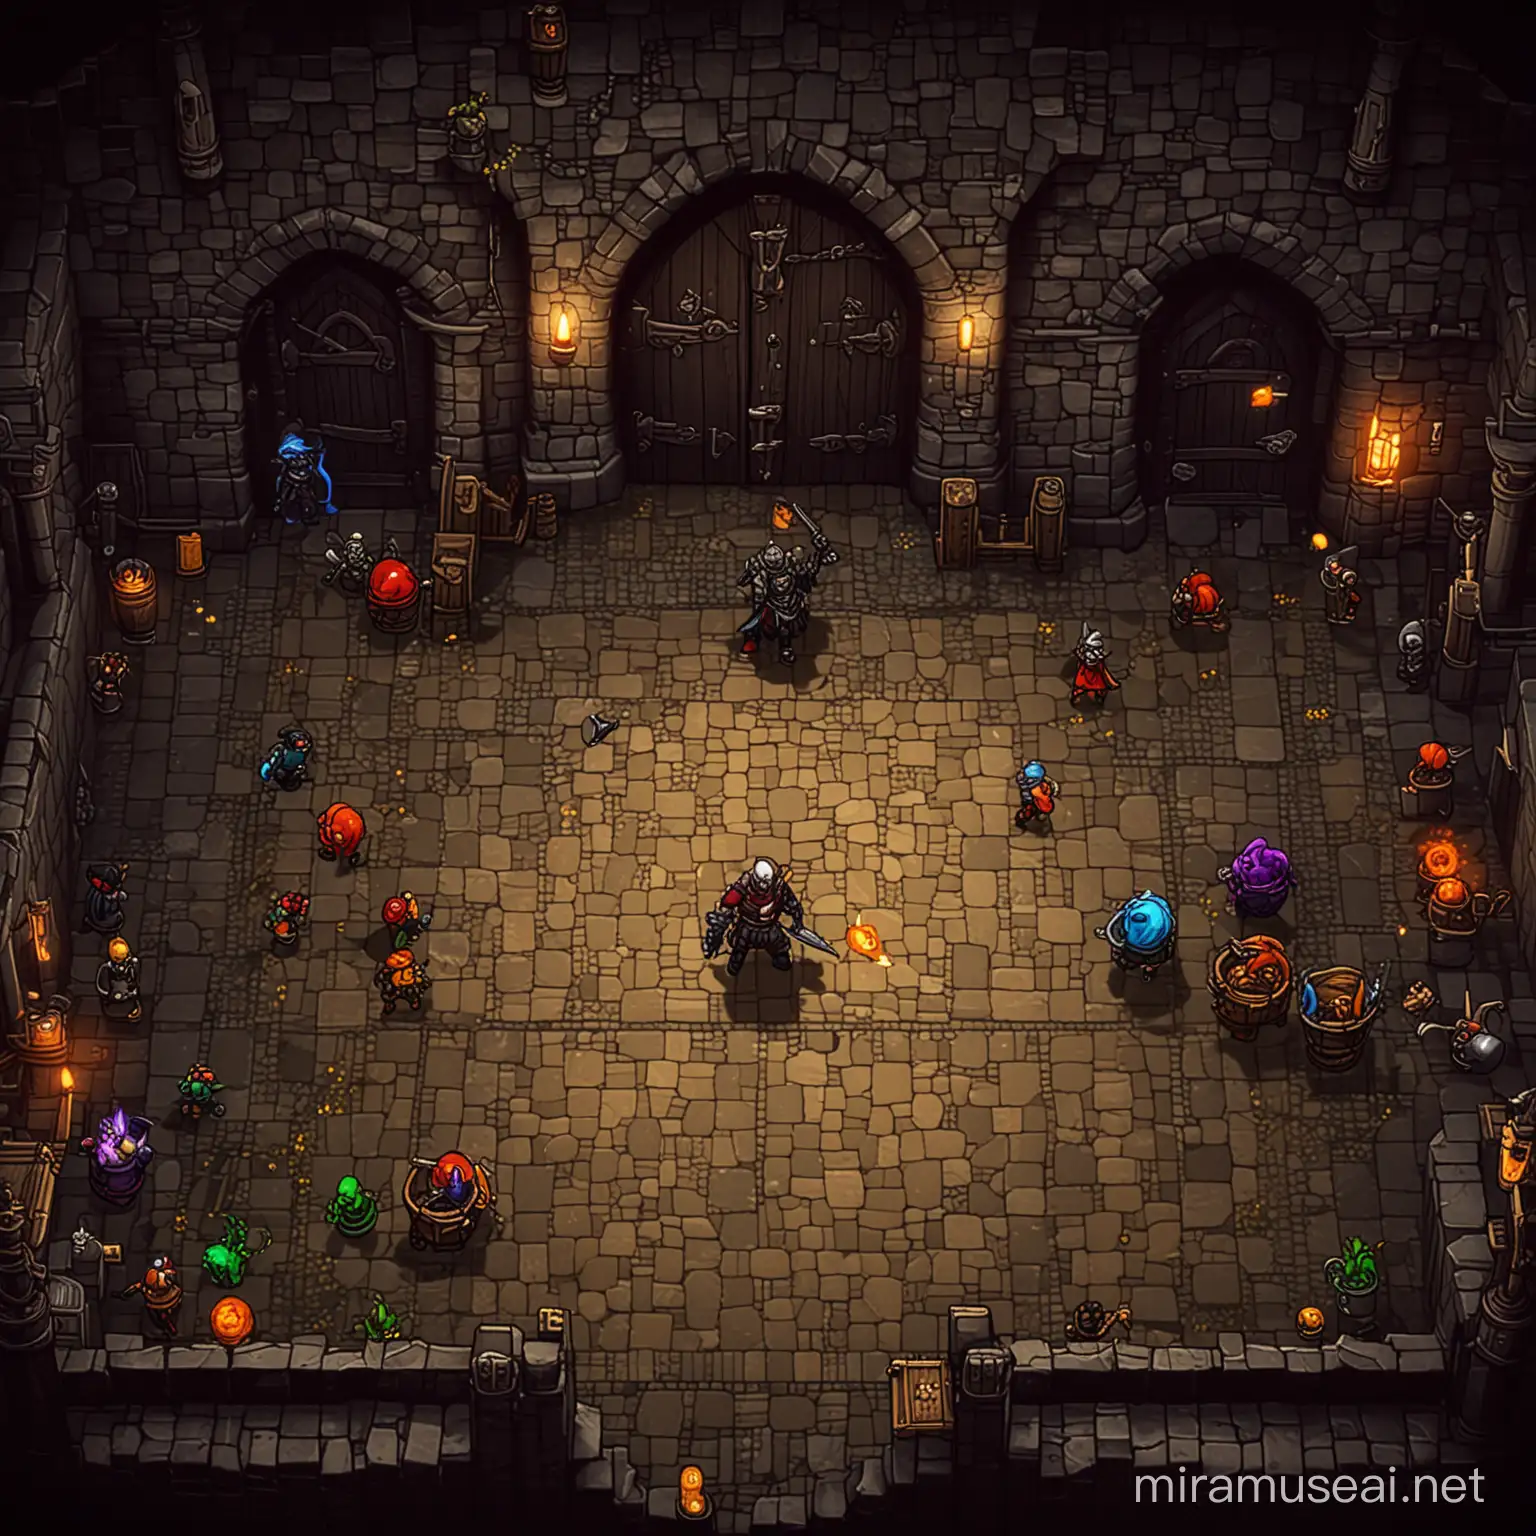 Gothic Fantasy Roguelike Action Game Design Dark Adventures in a 2D World